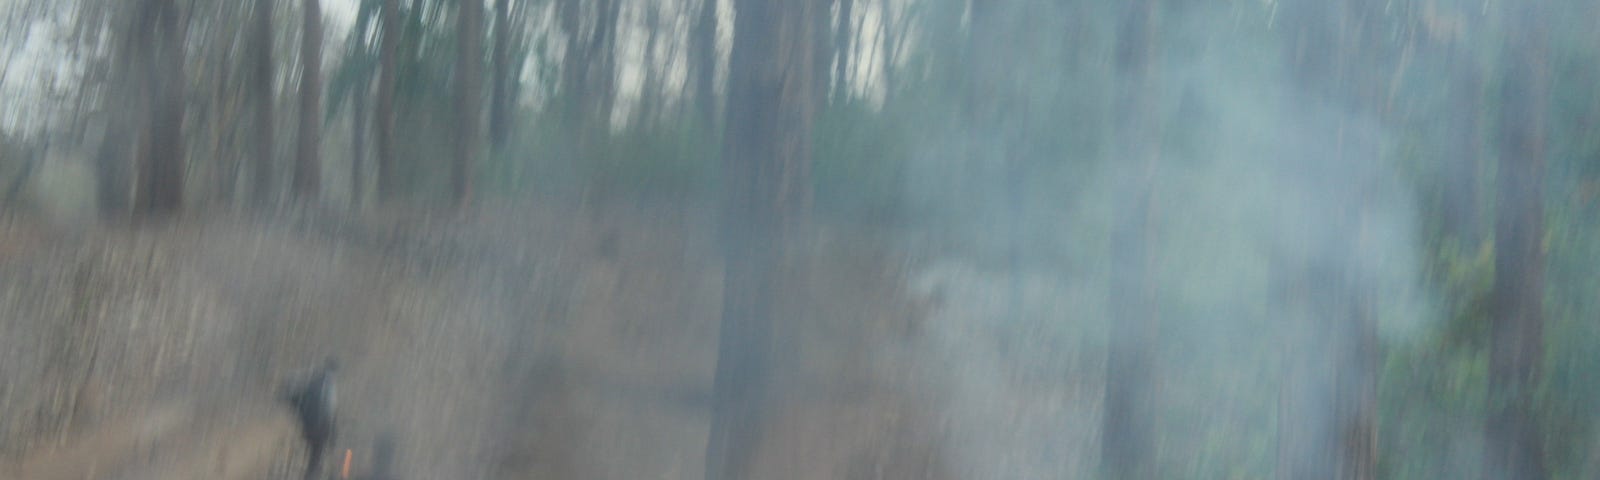 A blurred image of burning pyre and smoke. Some blurred human figures in the background.